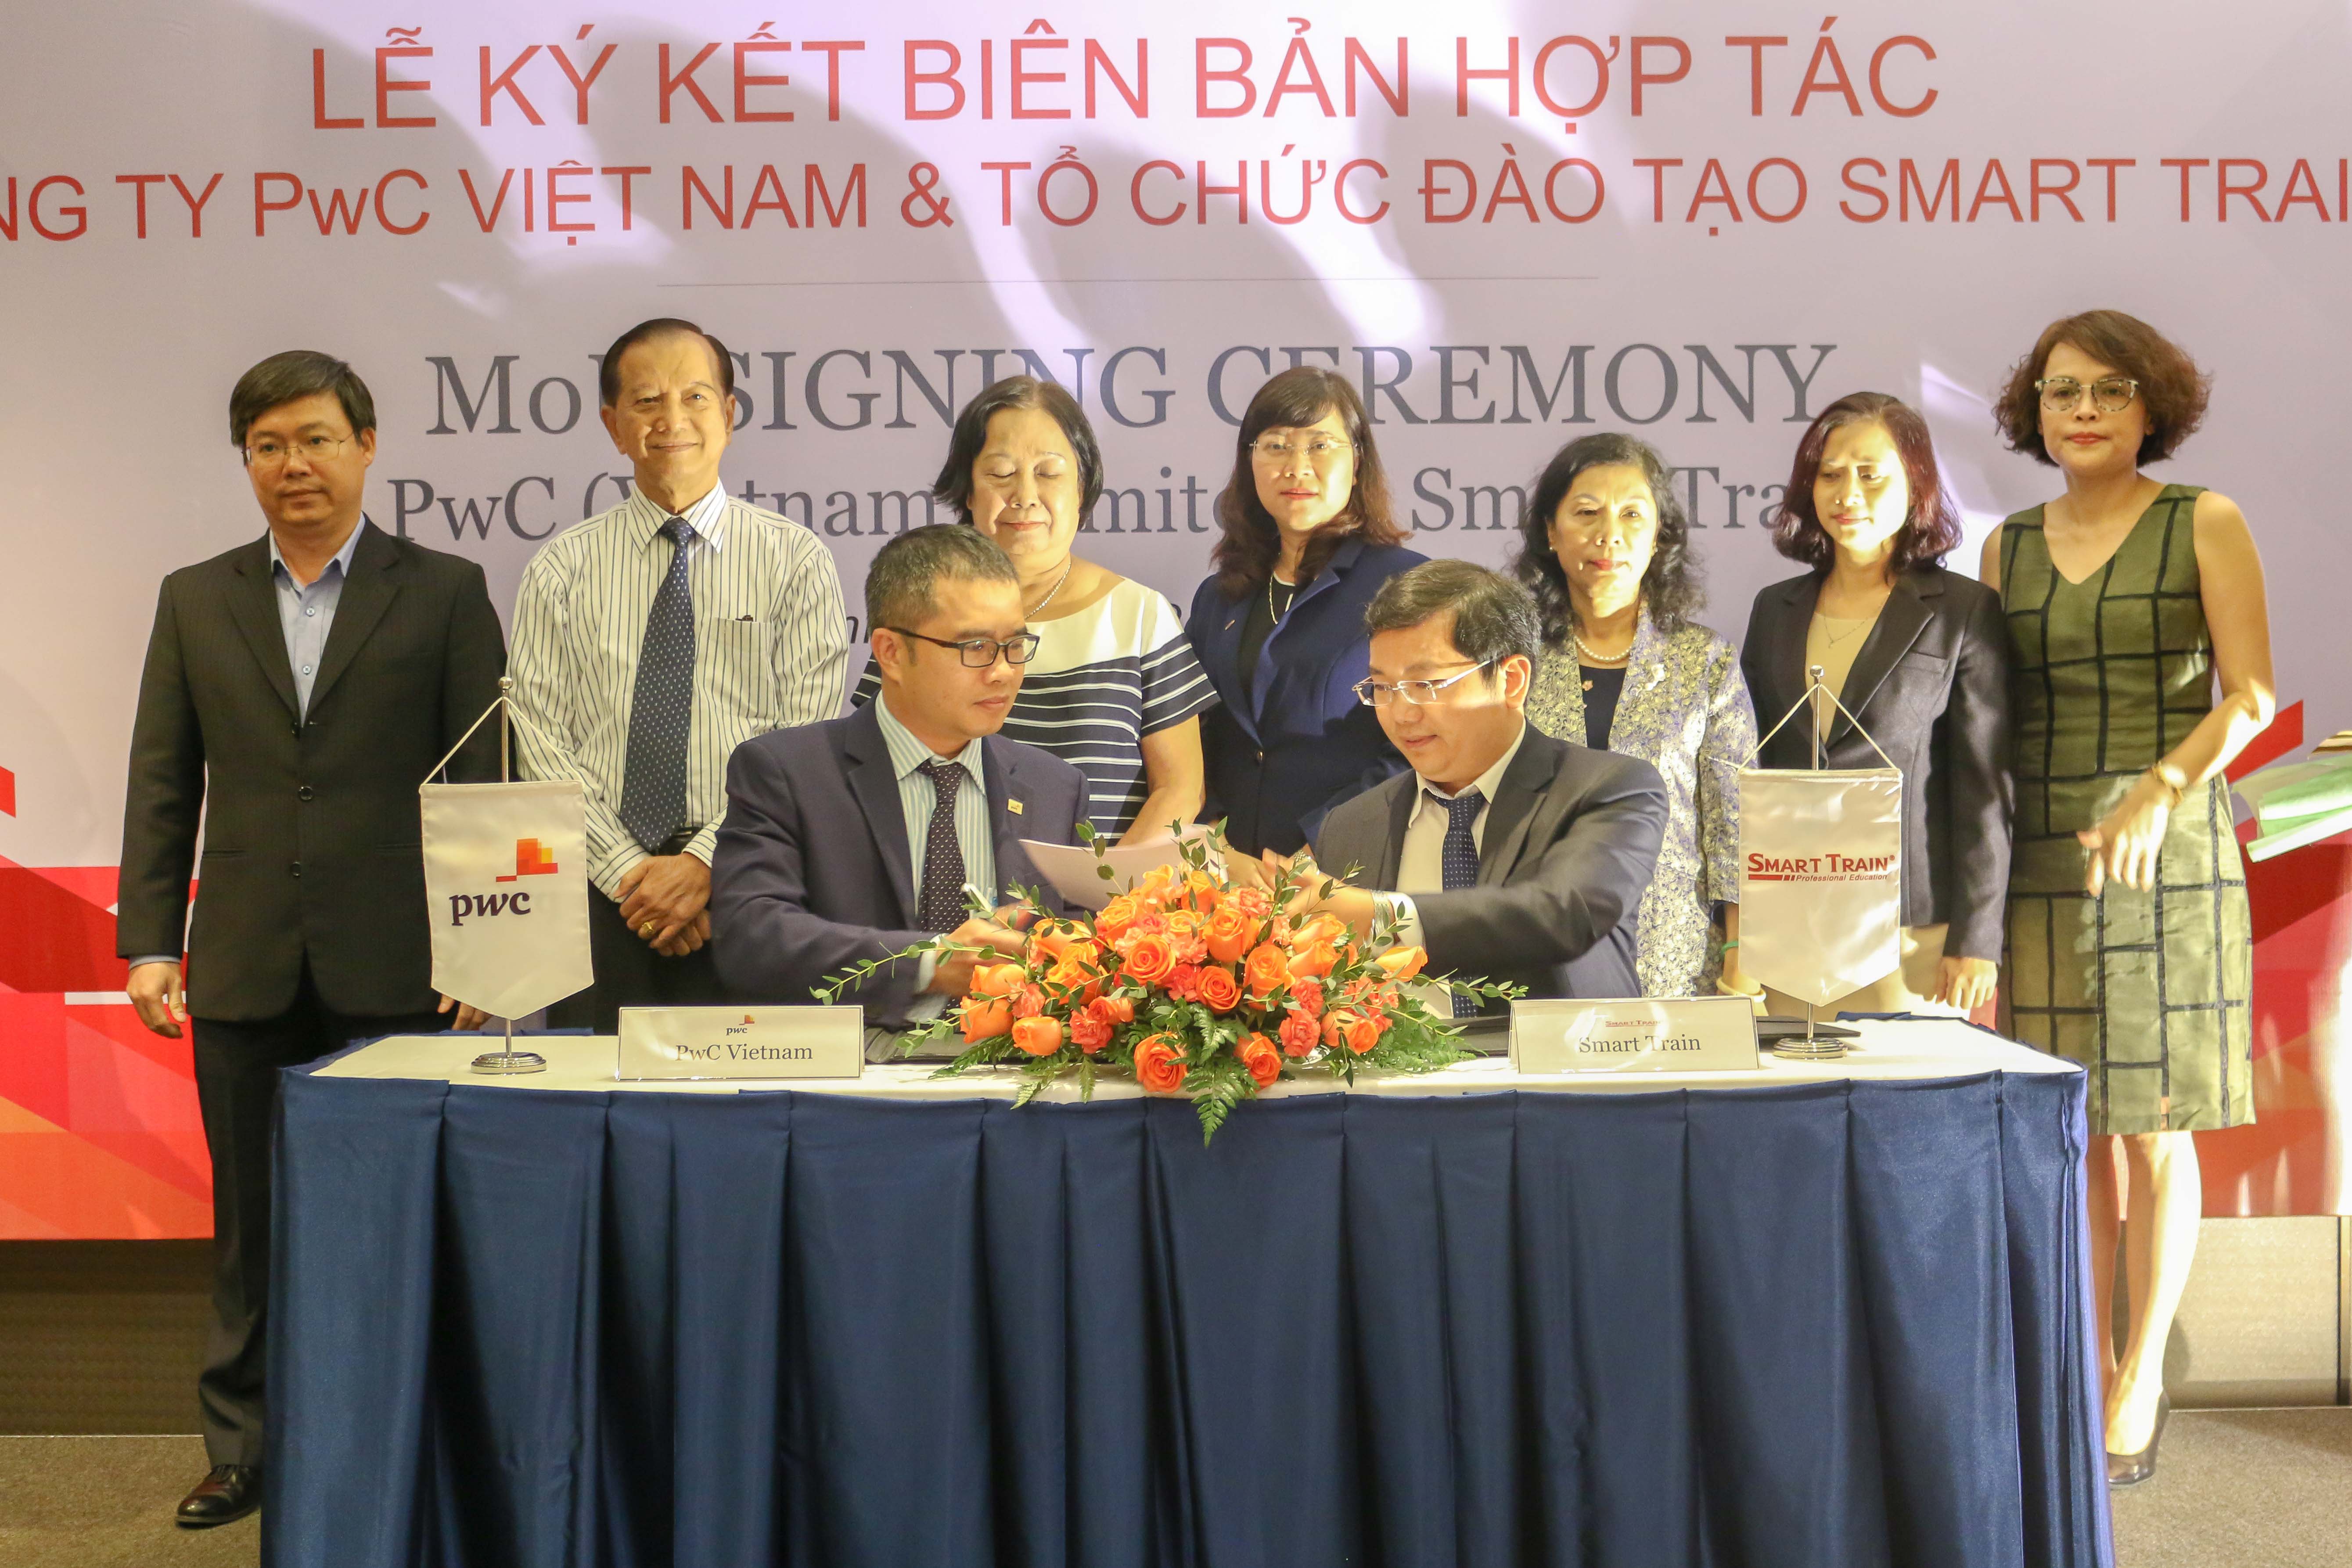 PwC Vietnam signed MoU with Smart Train